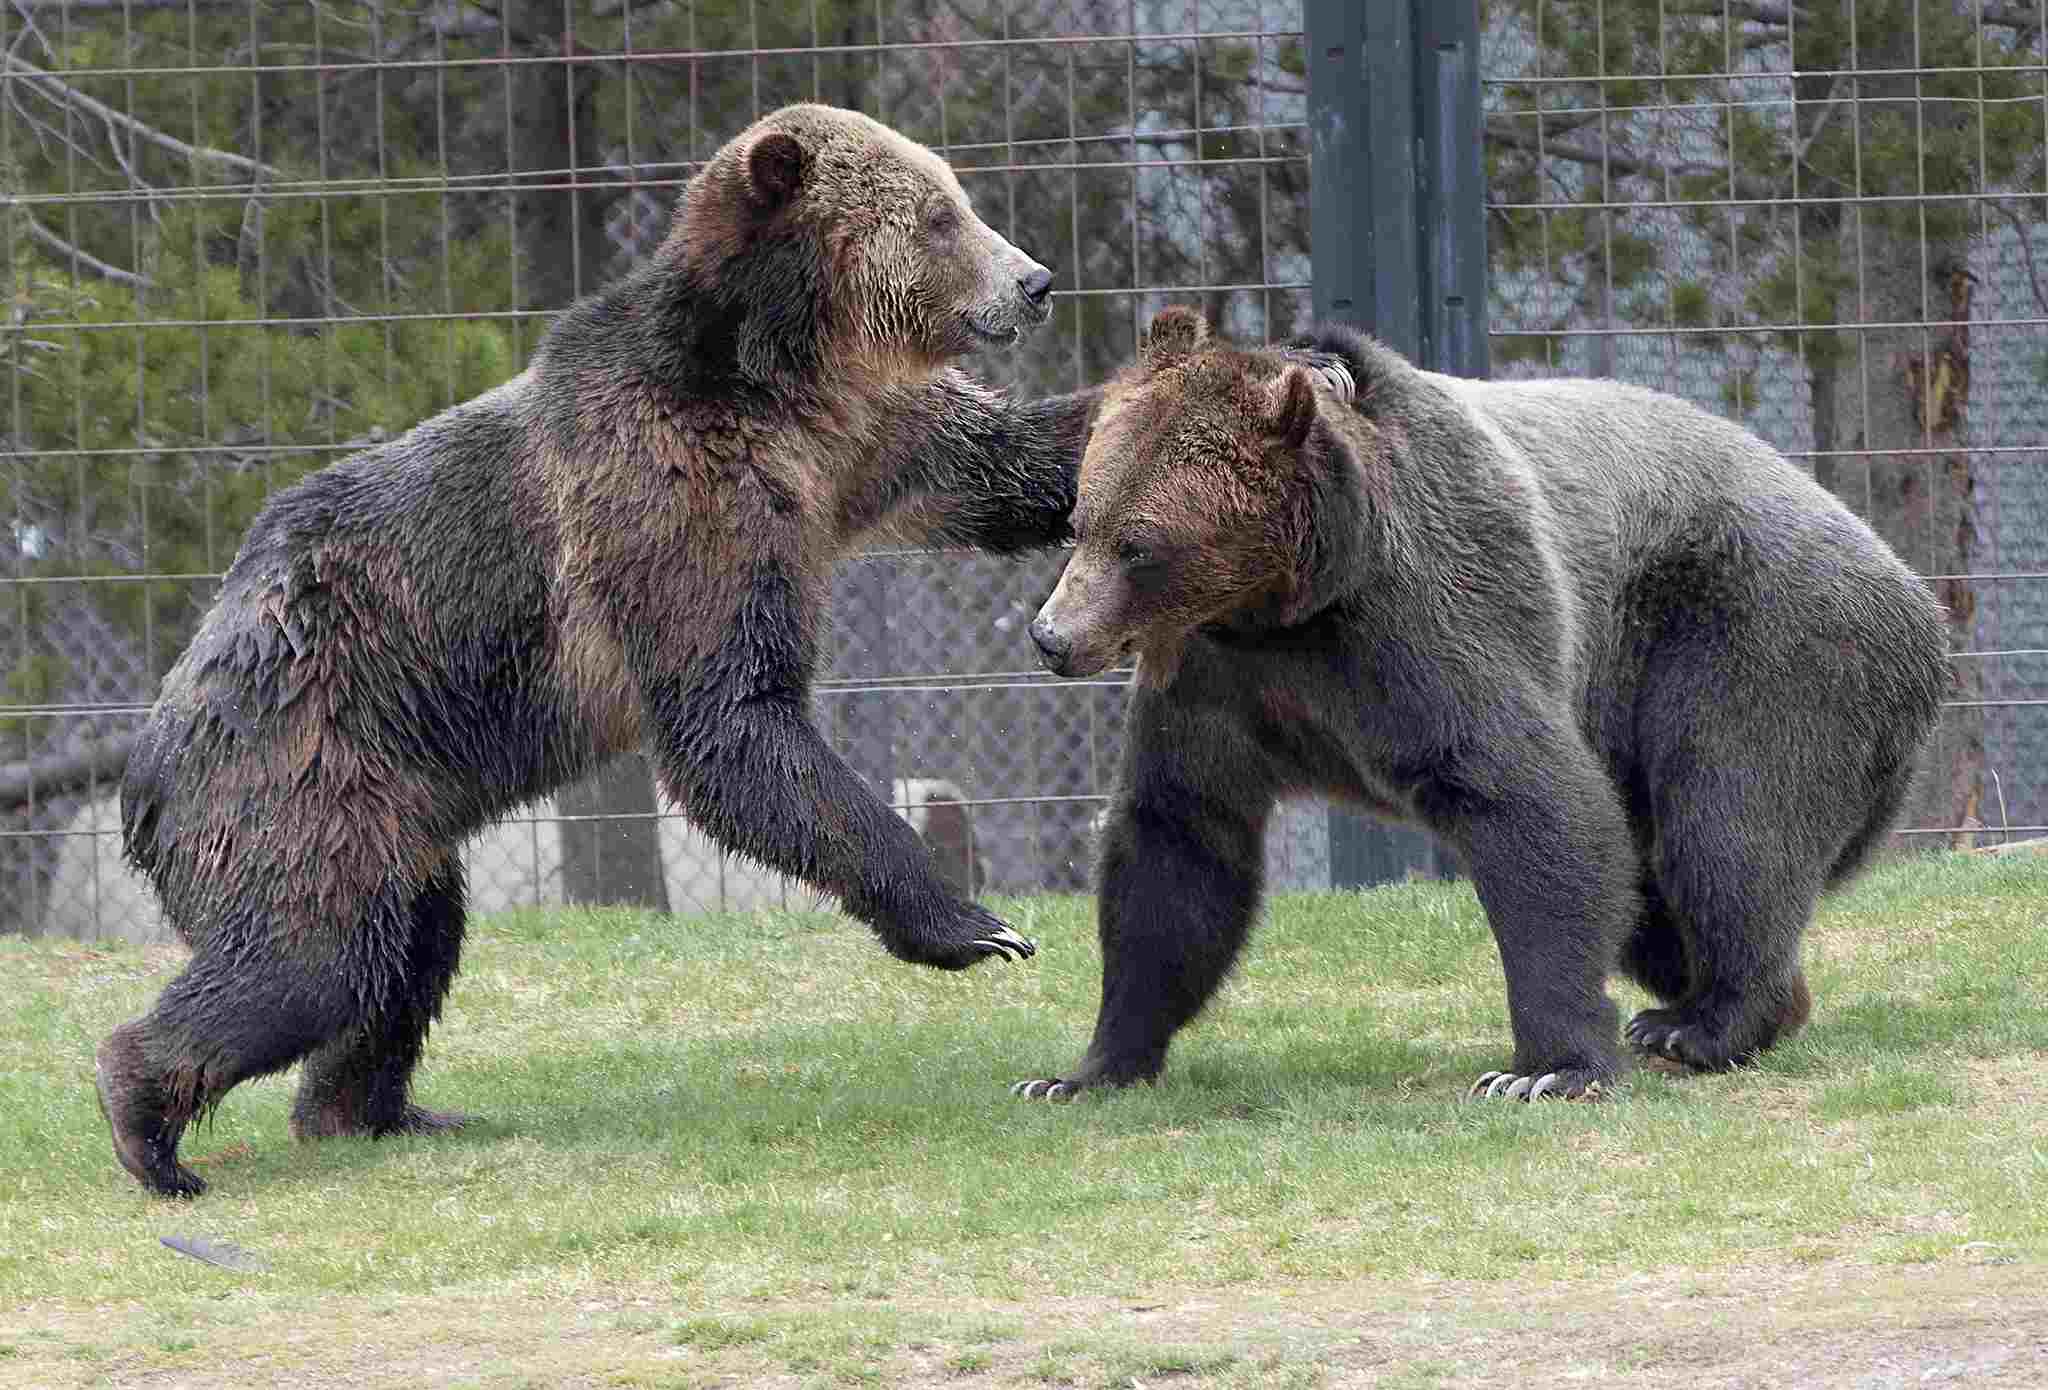 Silverback Gorilla Vs Grizzly Bear: Taxonomic and Morphological Disparities Exist Between Gorillas and Grizzly Bears (Credit: Watts 2023 .CC BY 2.0.)